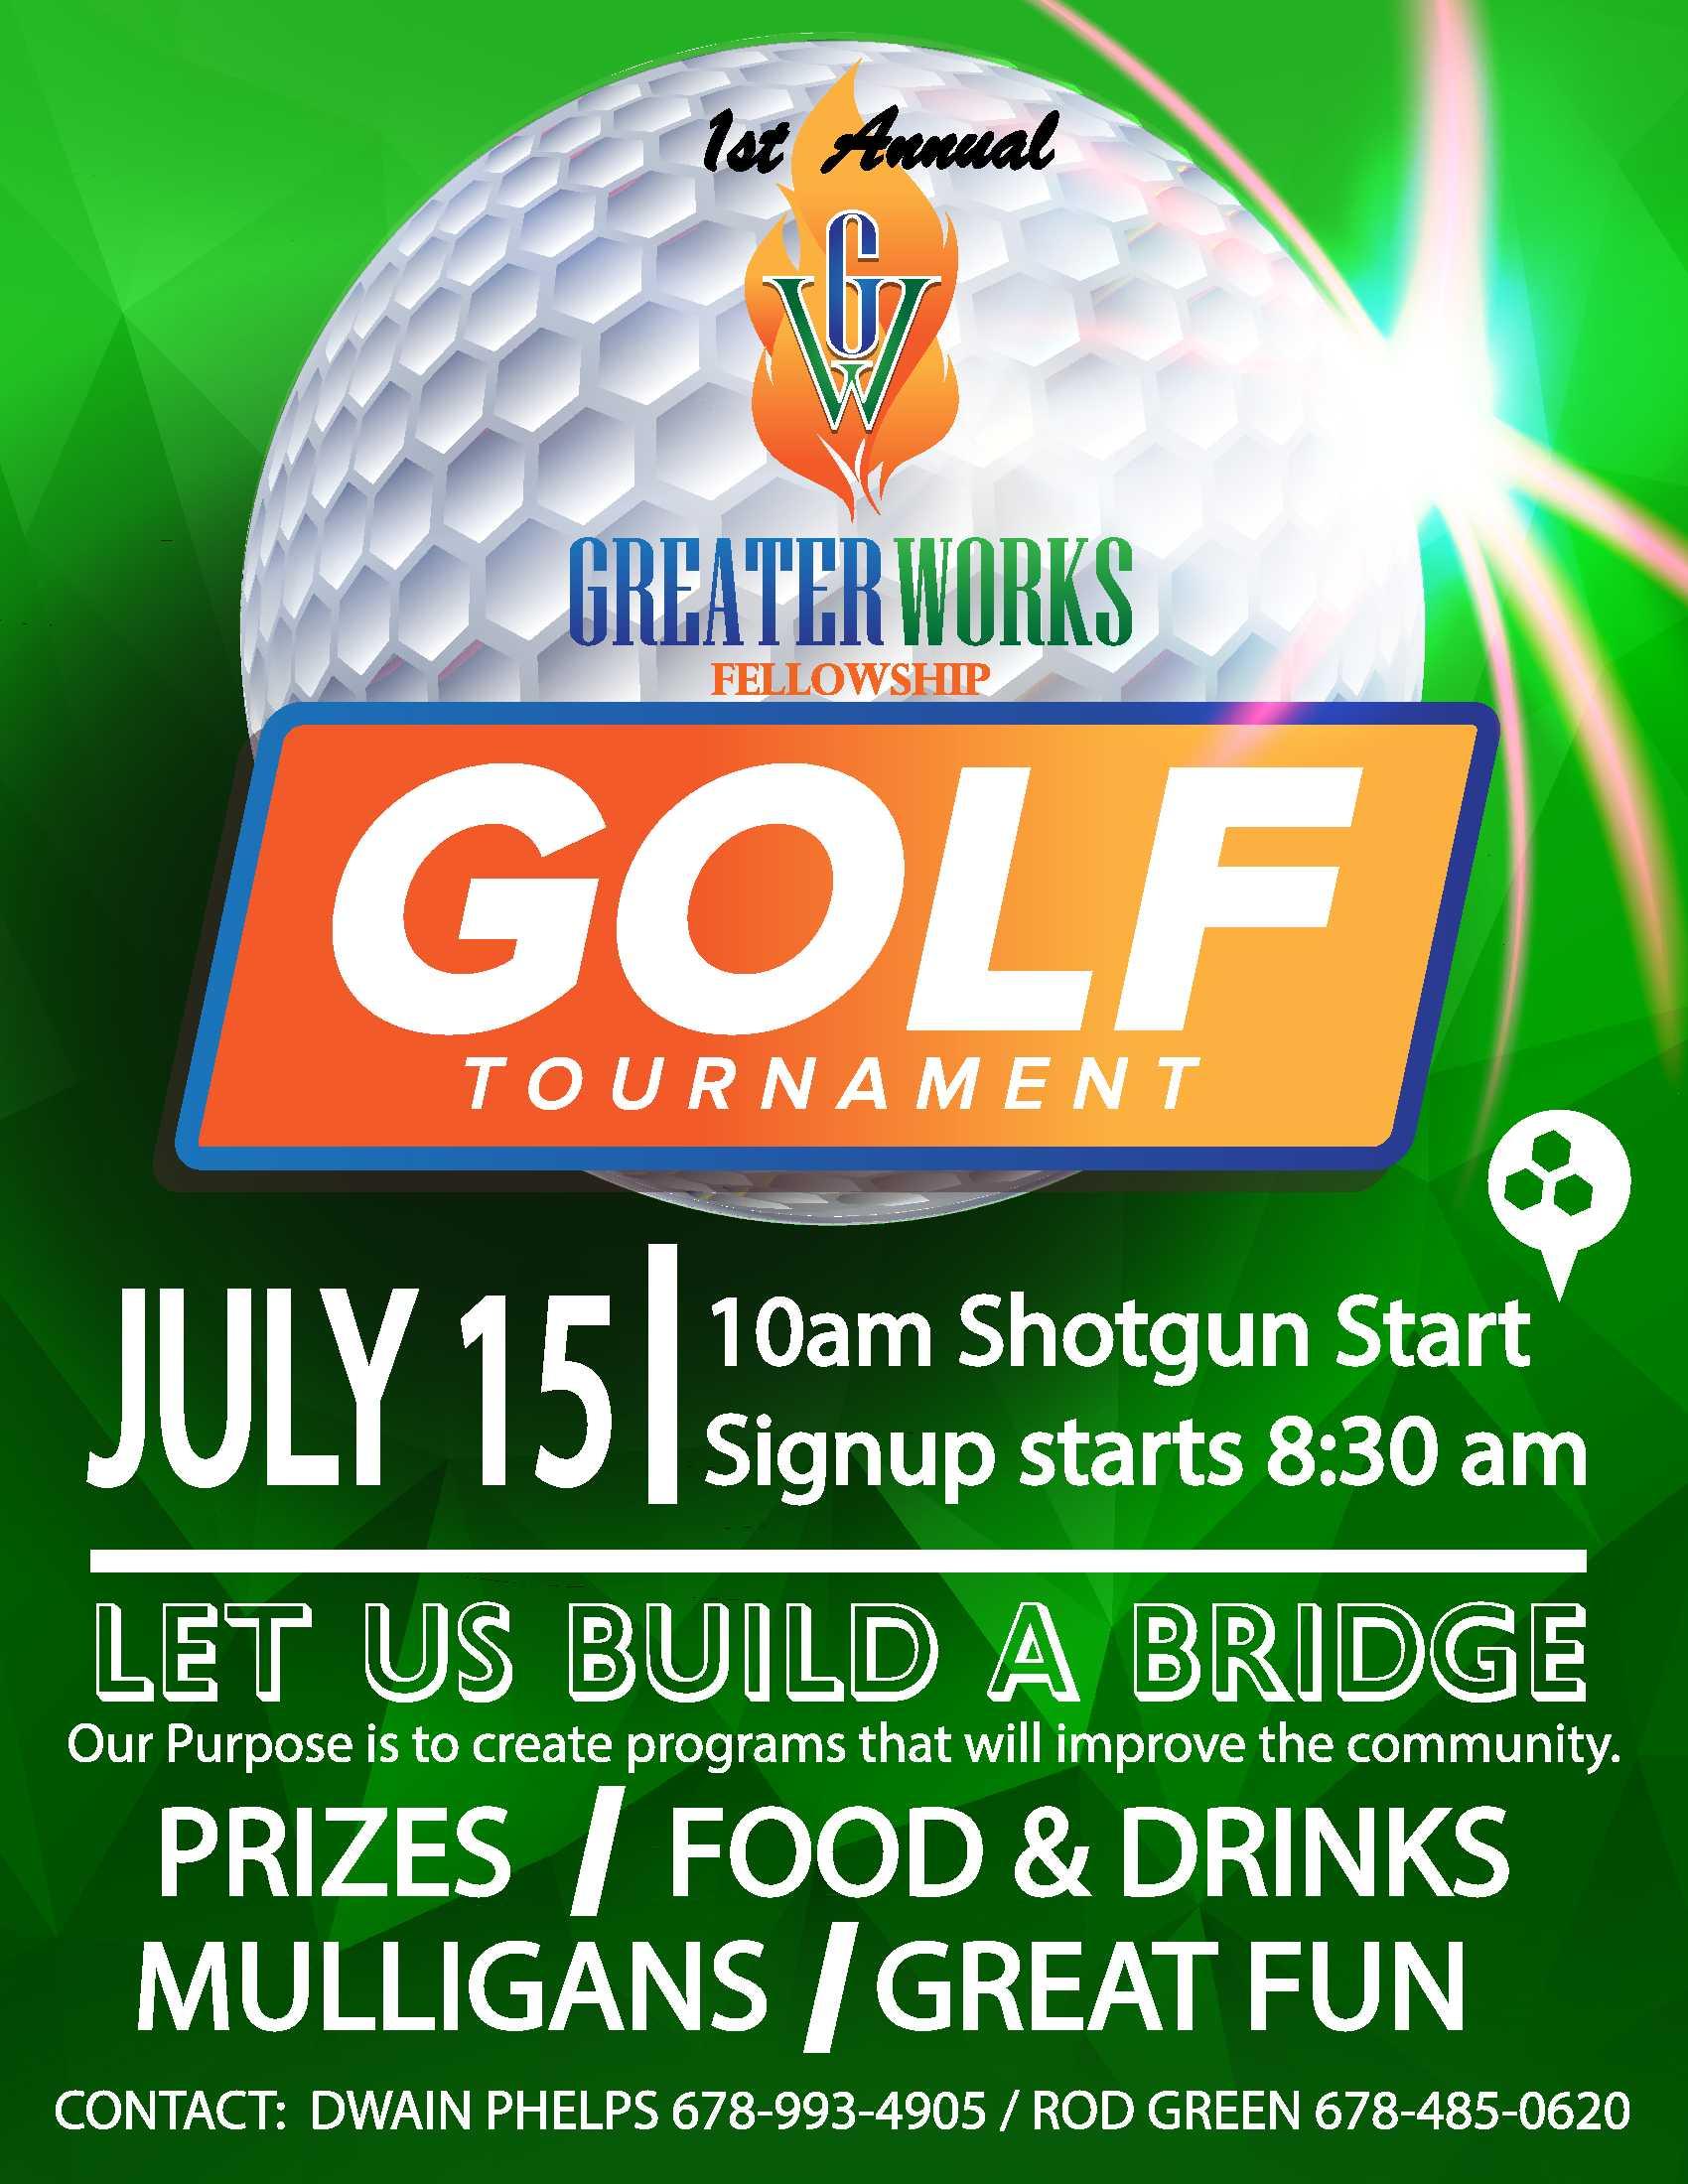 Greater Works Fellowship Annual Golf Tournament